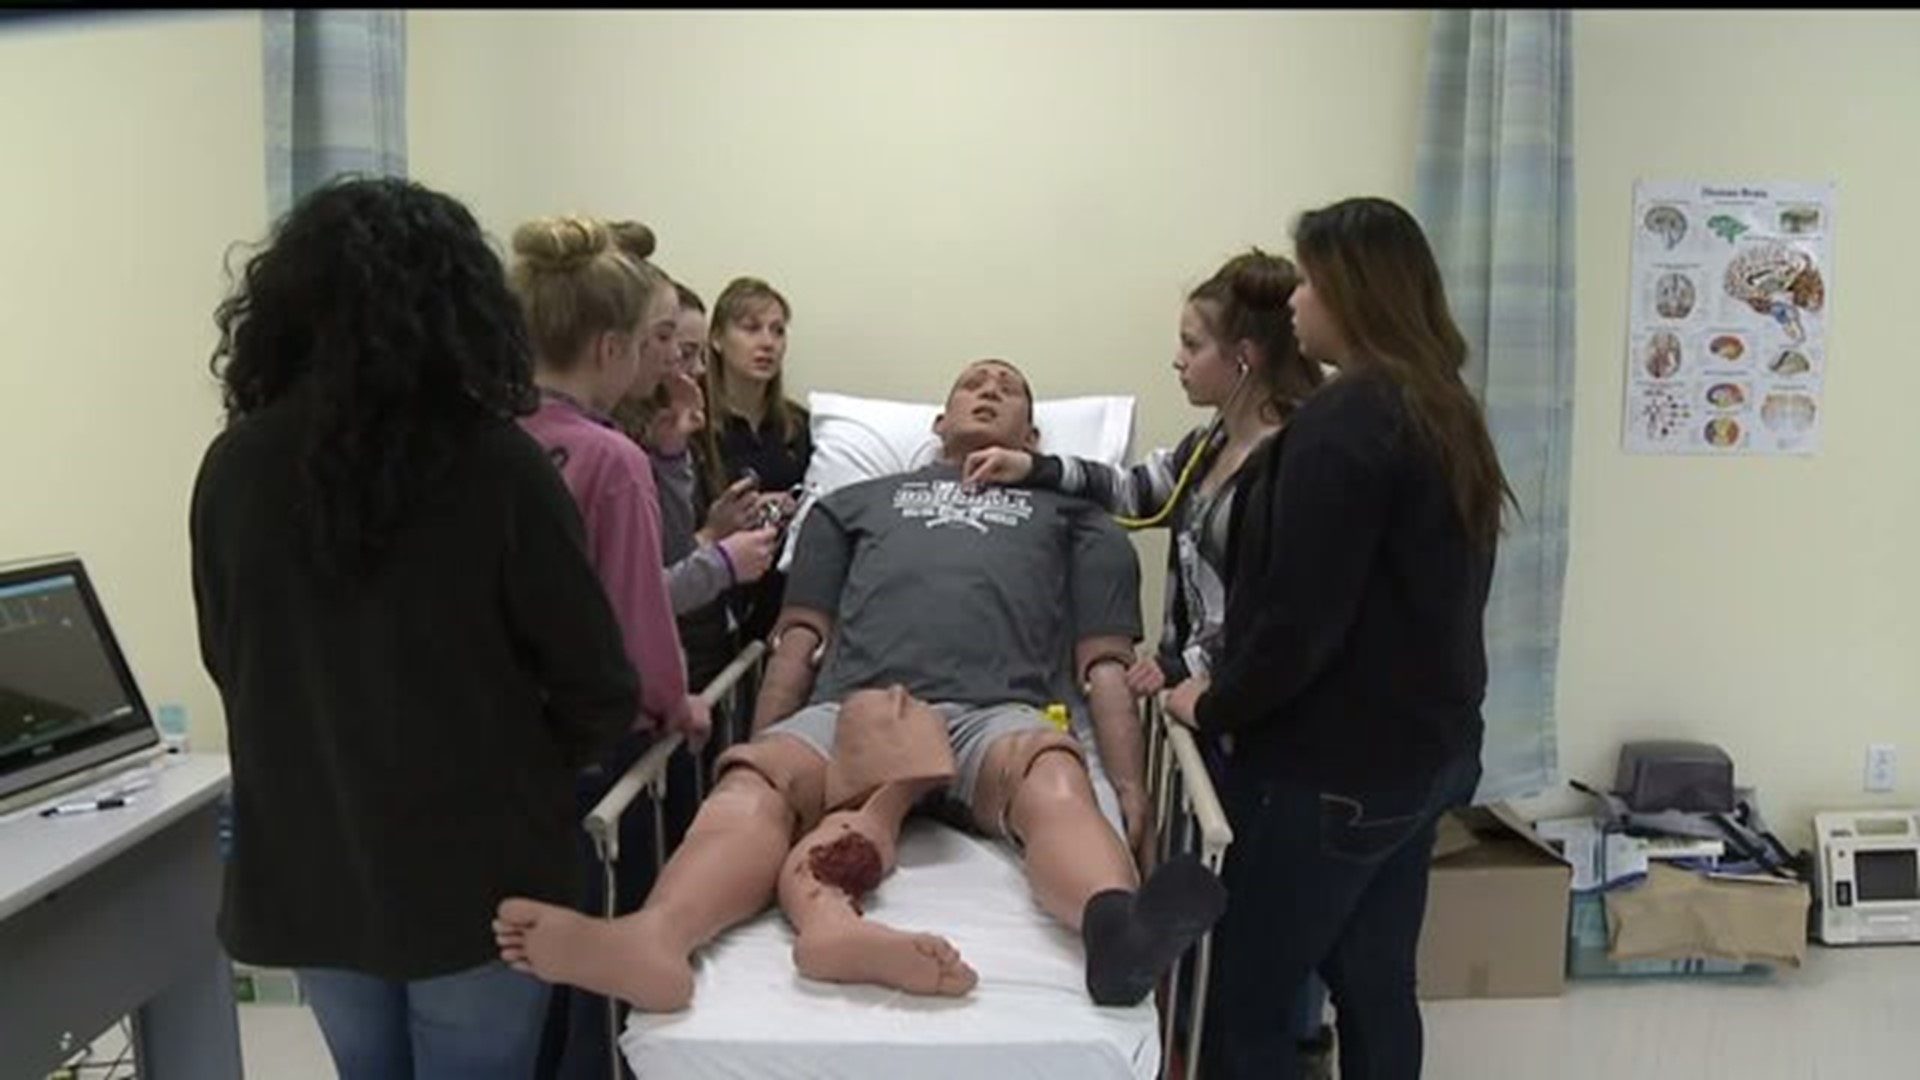 Students get hands on medical experience